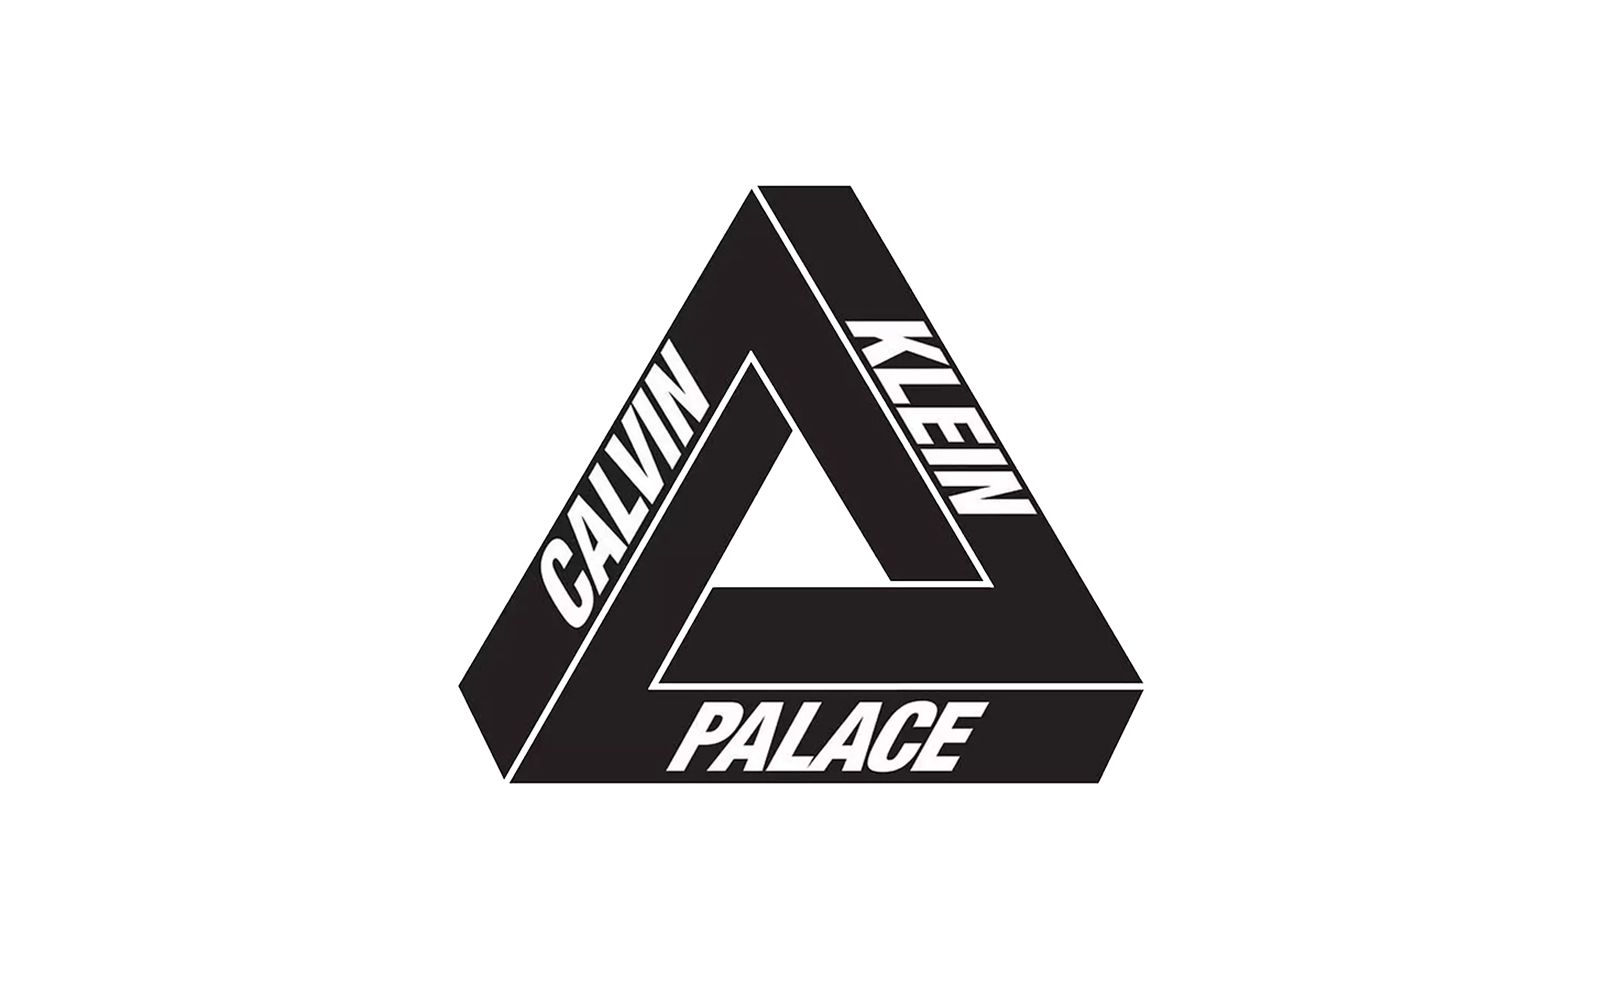 What to expect from the collaboration between Palace and Calvin Klein